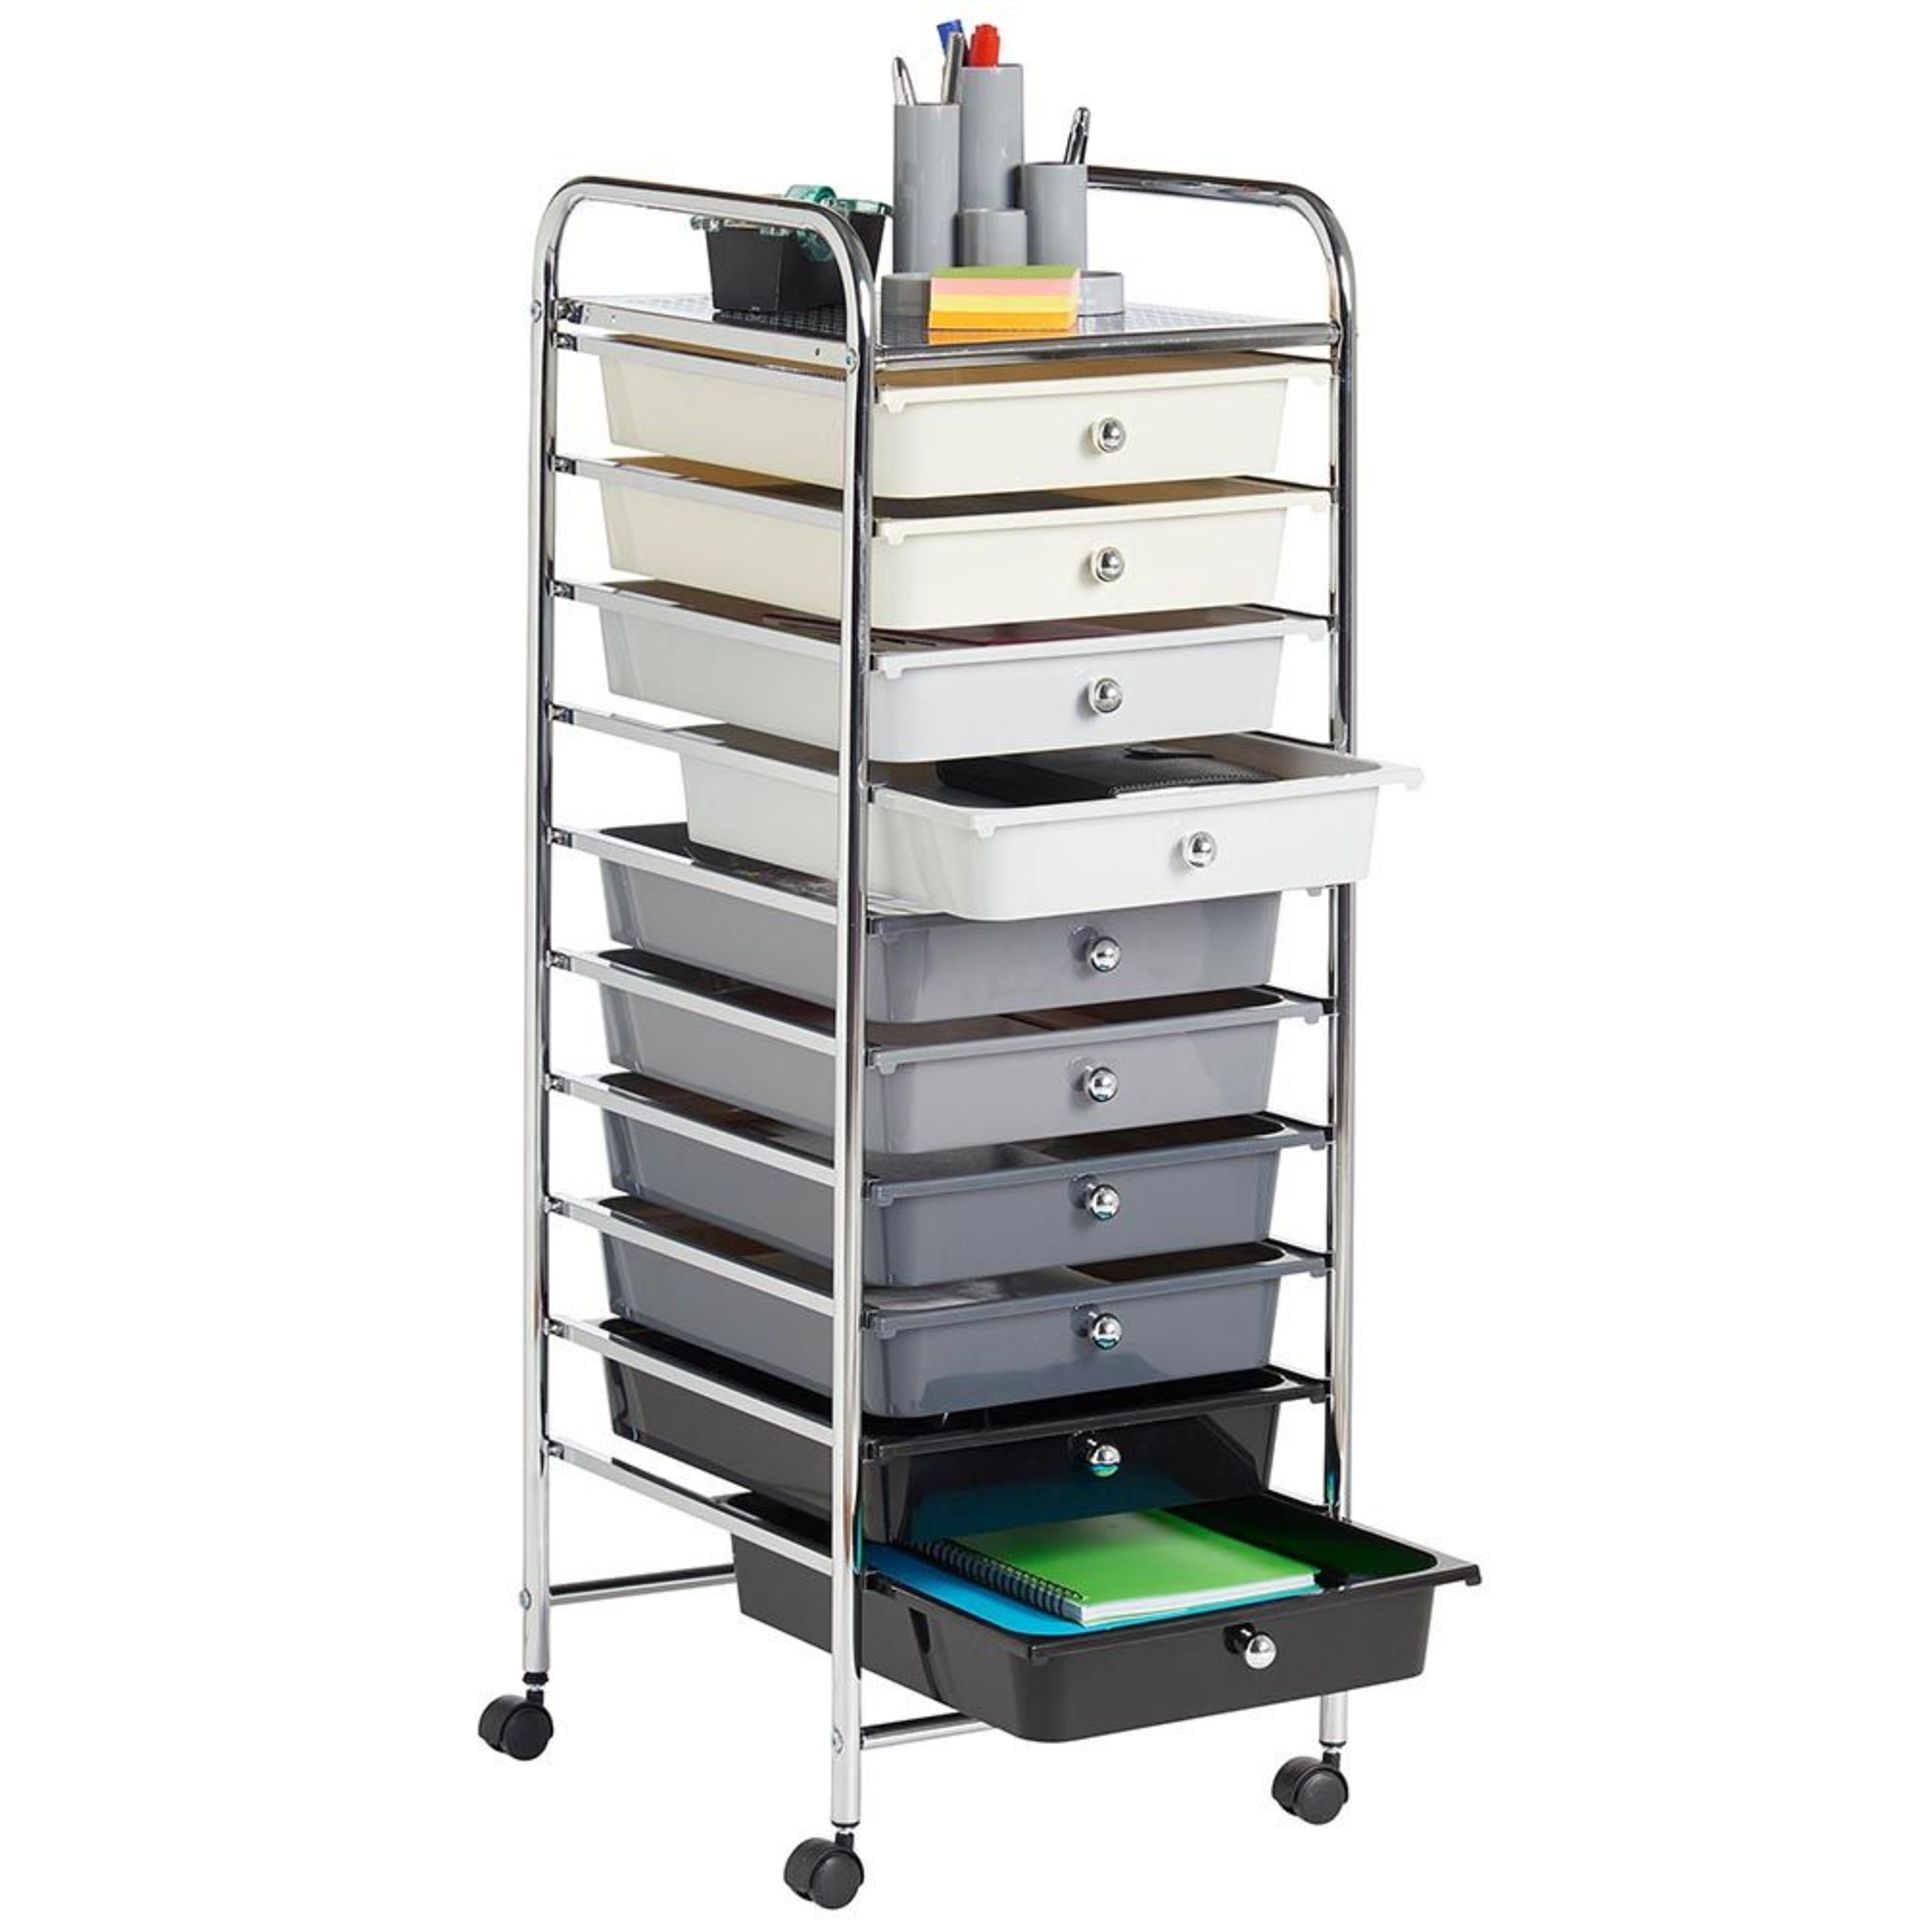 (KG16) Ombre 10 Drawer Trolley. Great for homes, offices, beauty salons and more! Each drawer ... - Image 4 of 4